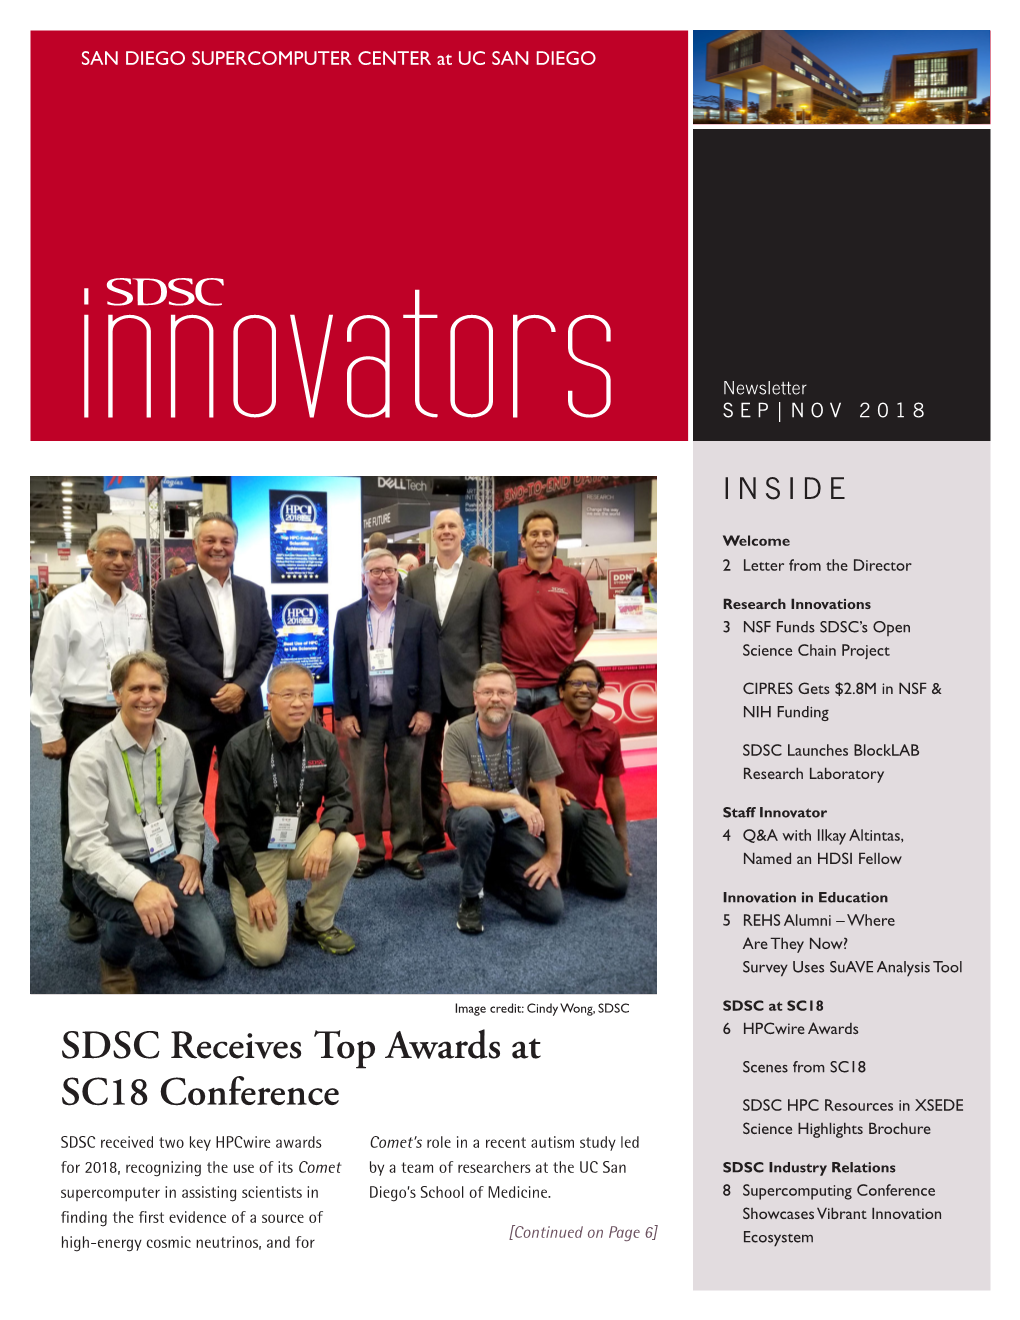 SDSC Receives Top Awards at SC18 Conference